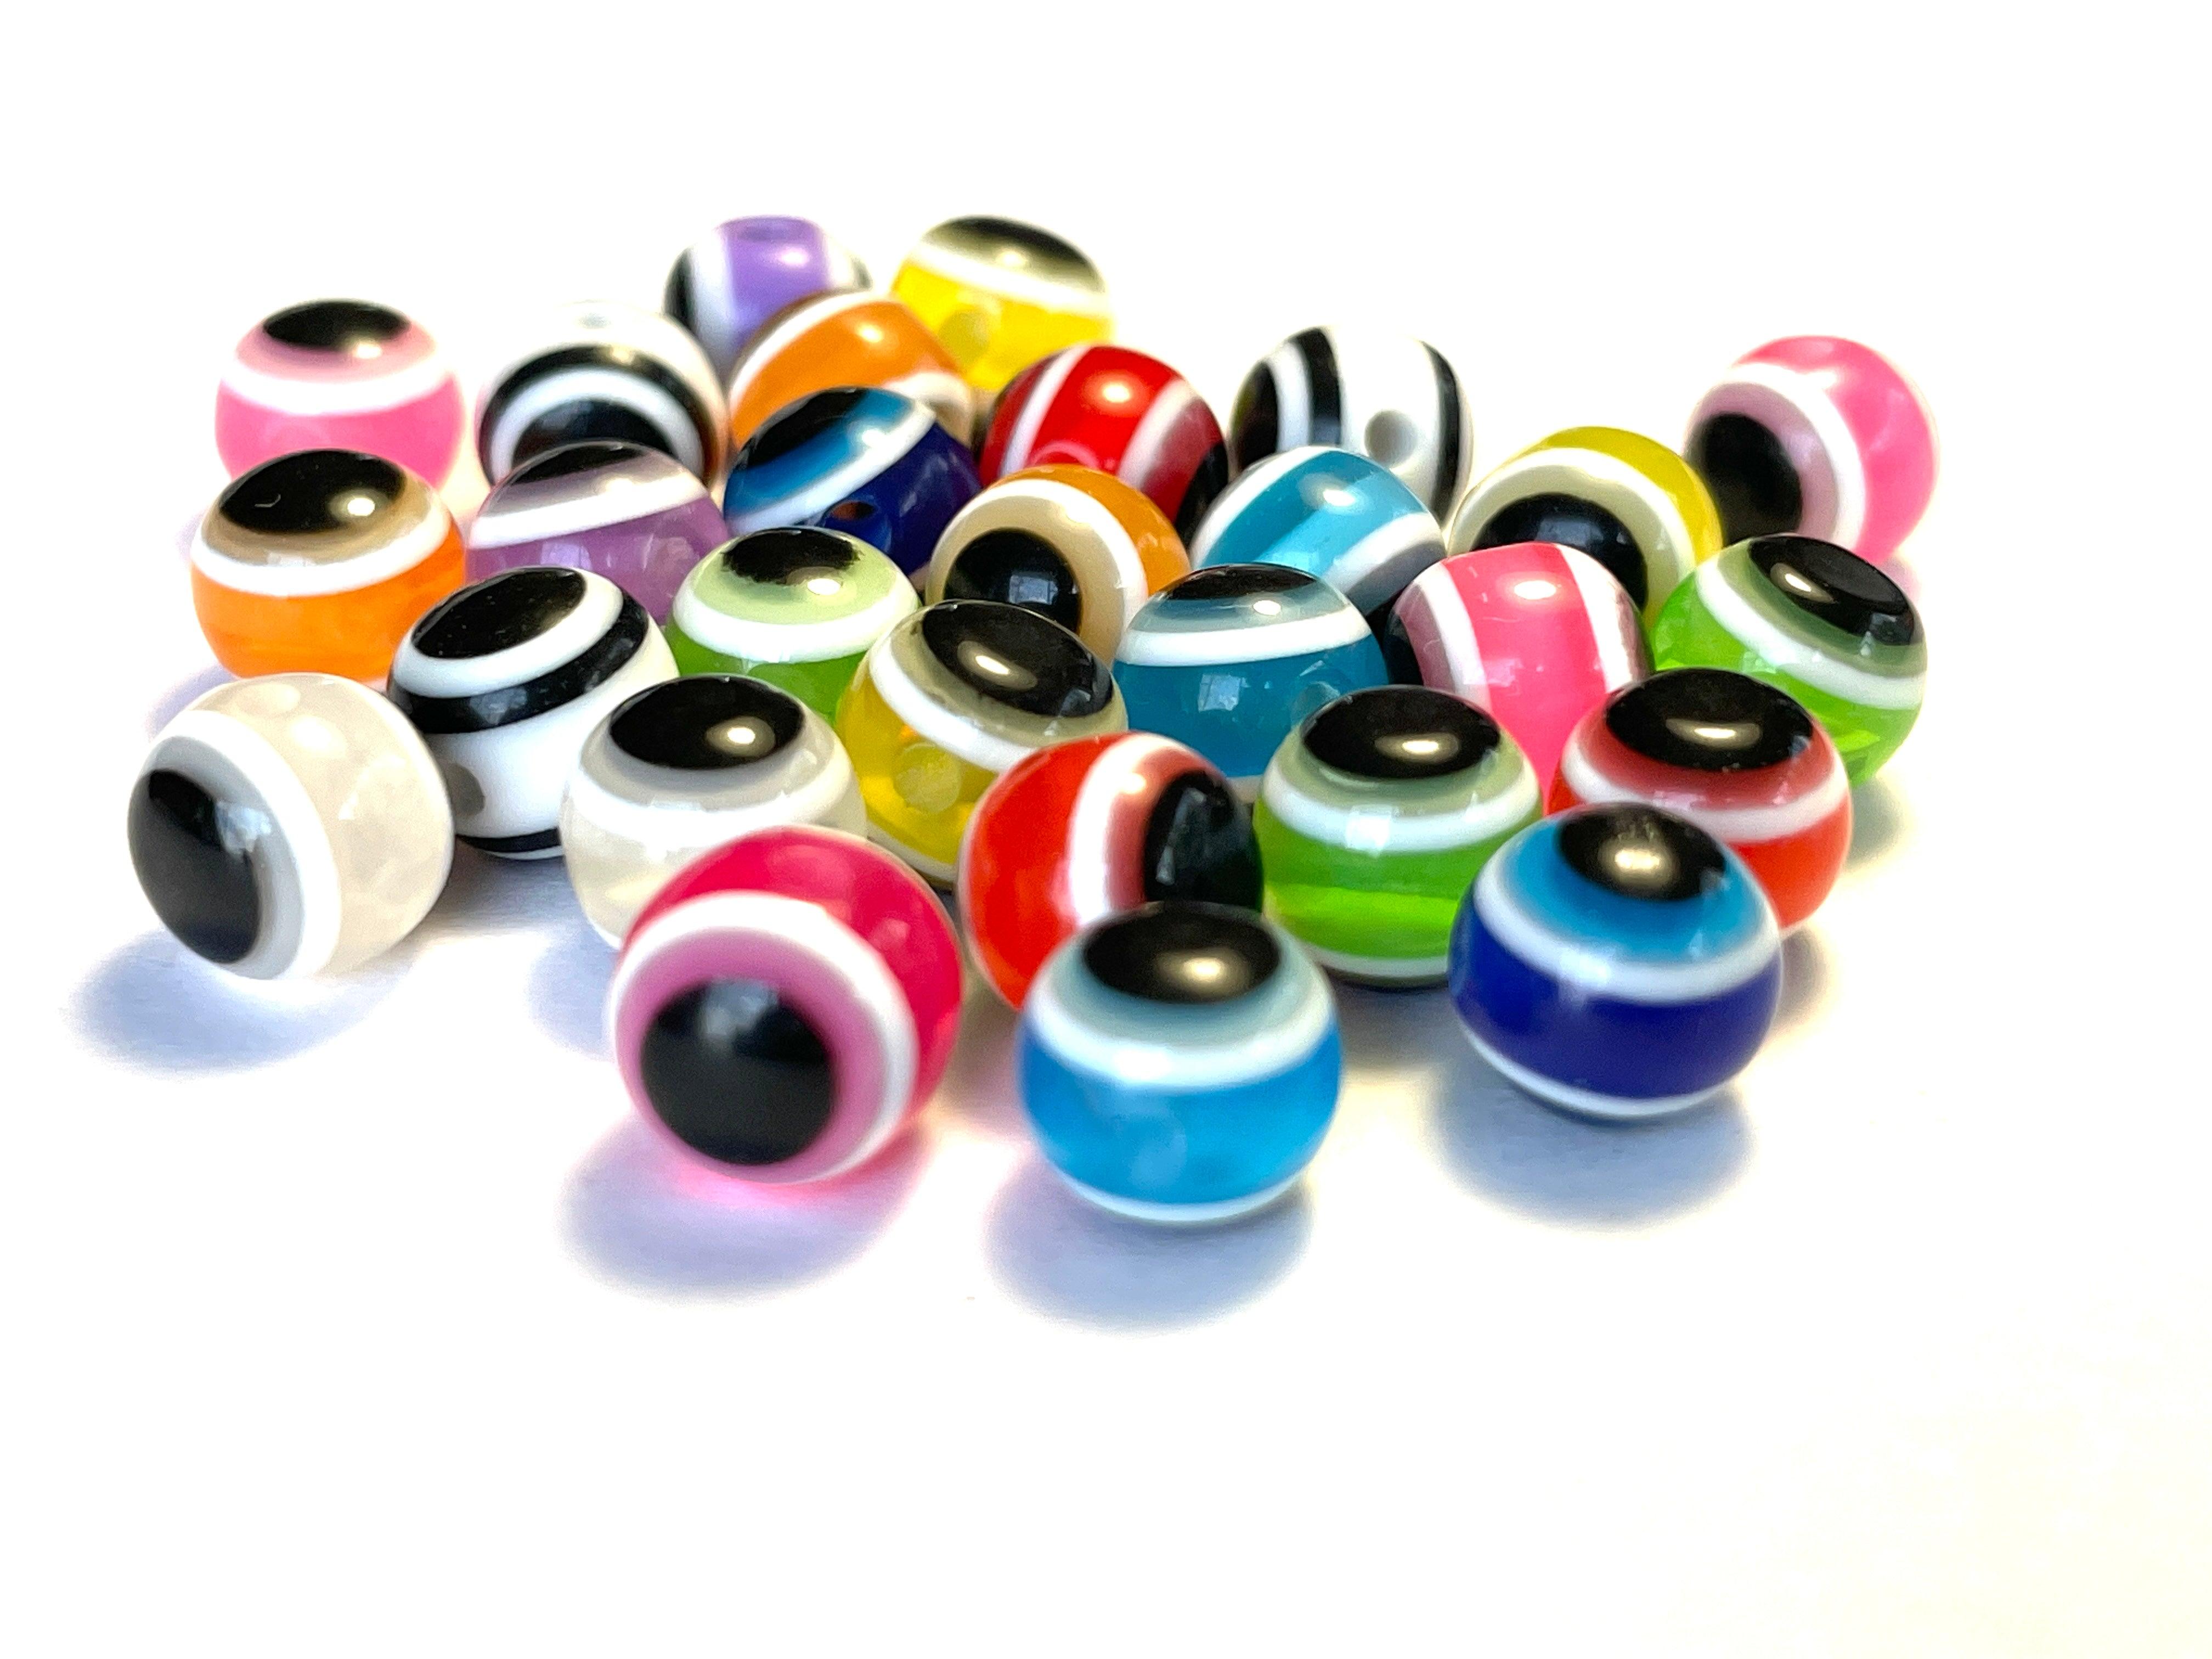 Resin Beads Galore: Unleash Your Creativity at Unbeatable Prices! –  RainbowShop for Craft